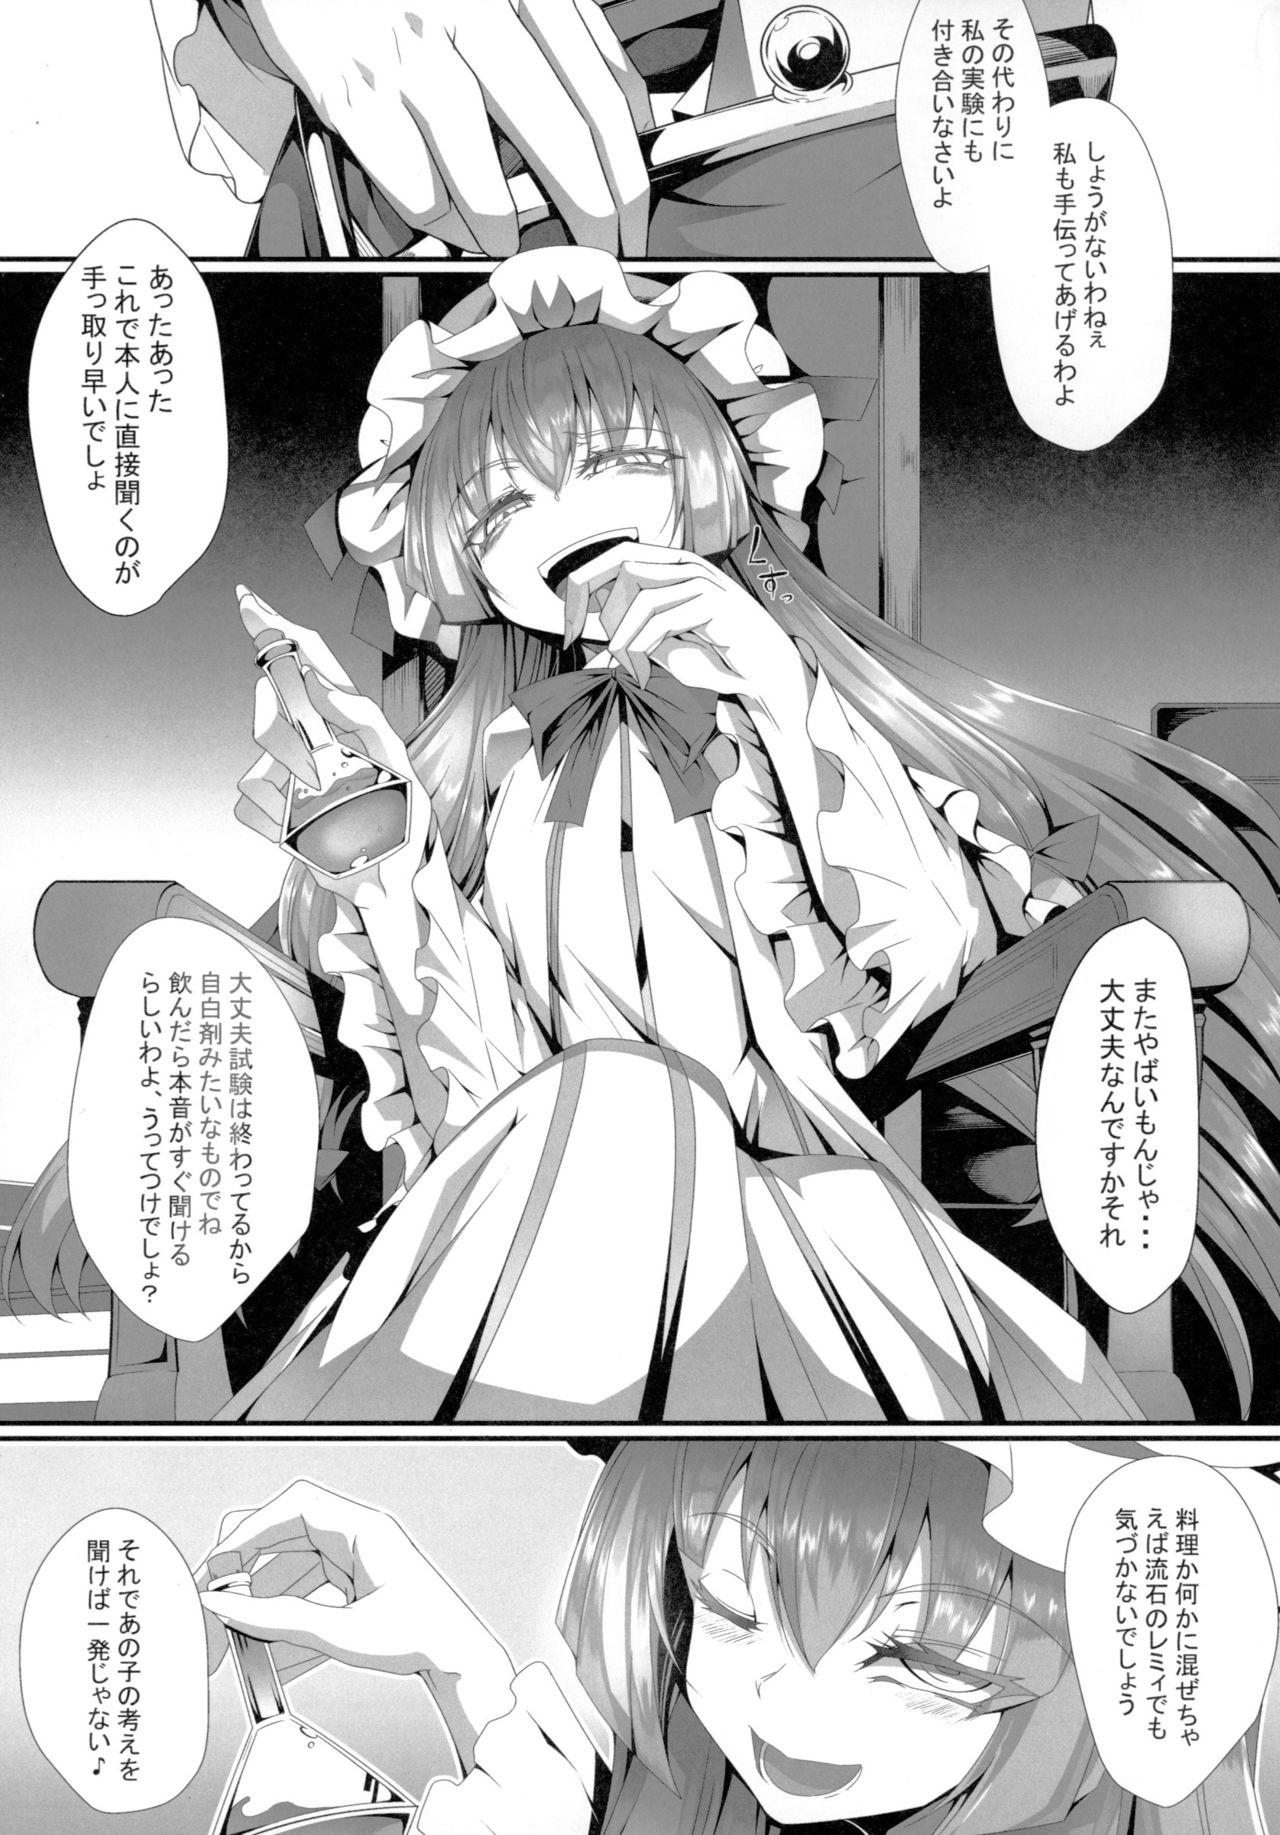 Sex M.P. Vol. 15 - Touhou project Huge Boobs - Page 4